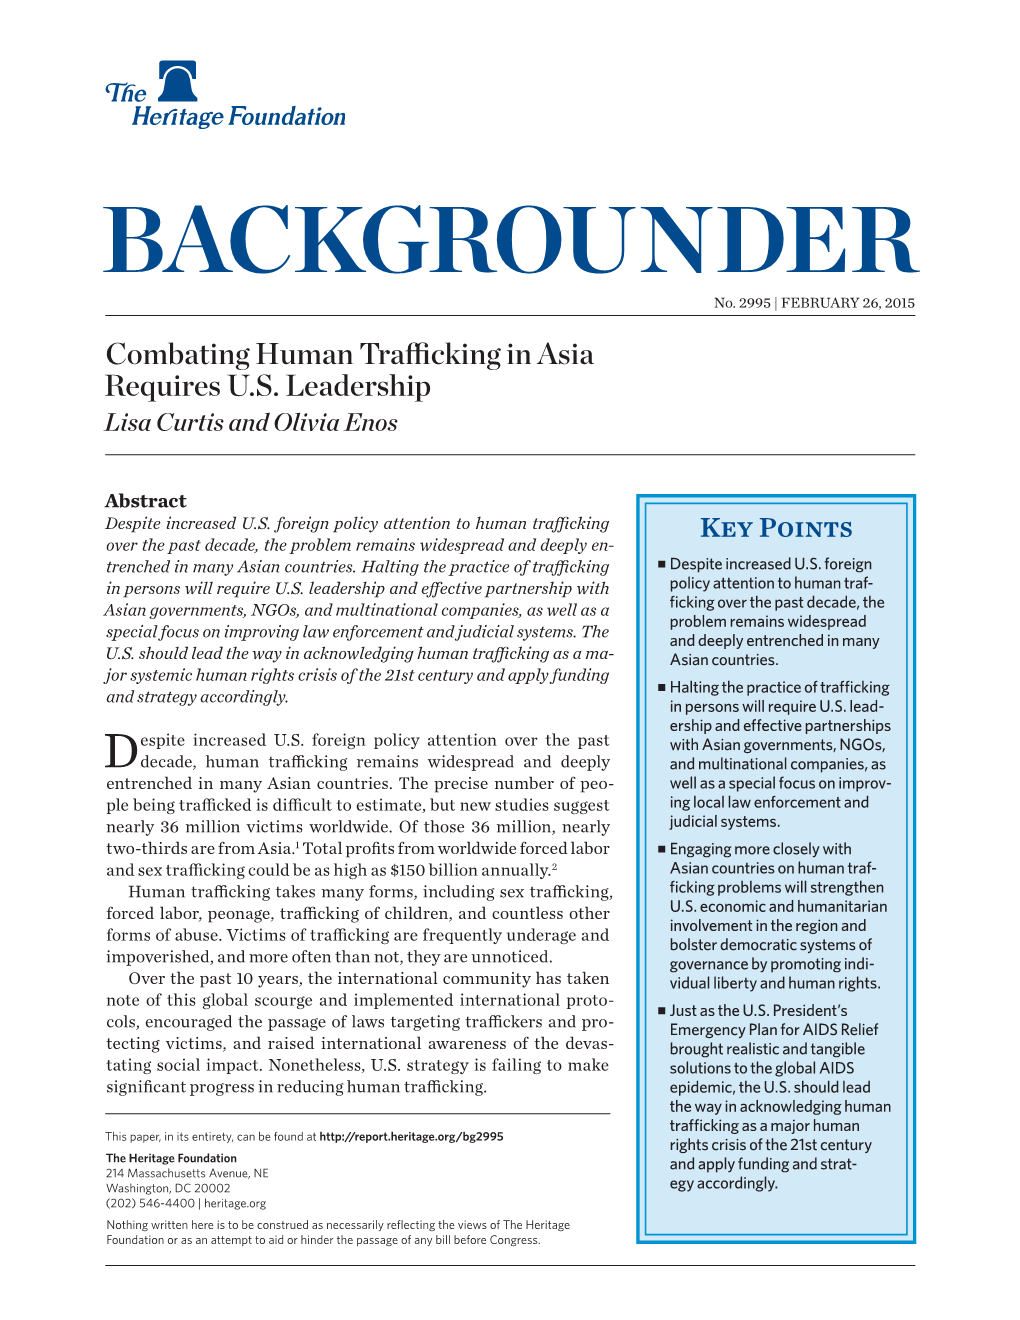 Combating Human Trafficking in Asia Requires U.S. Leadership Lisa Curtis and Olivia Enos